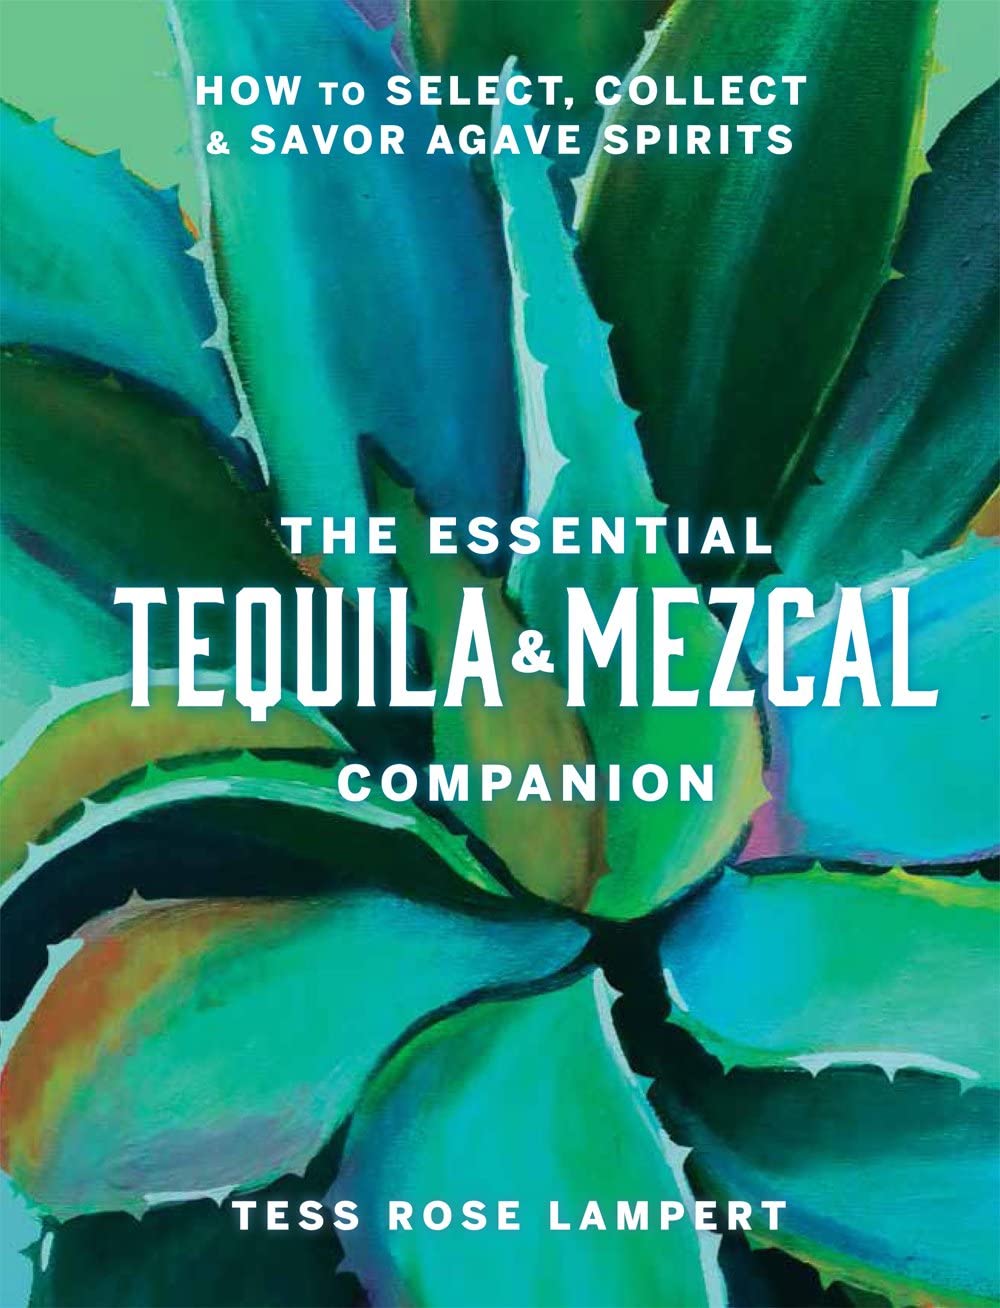 The Essential Tequila & Mezcal Companion: How to Select, Collect & Savor Agave Spirits (Tess Rose Lampert)